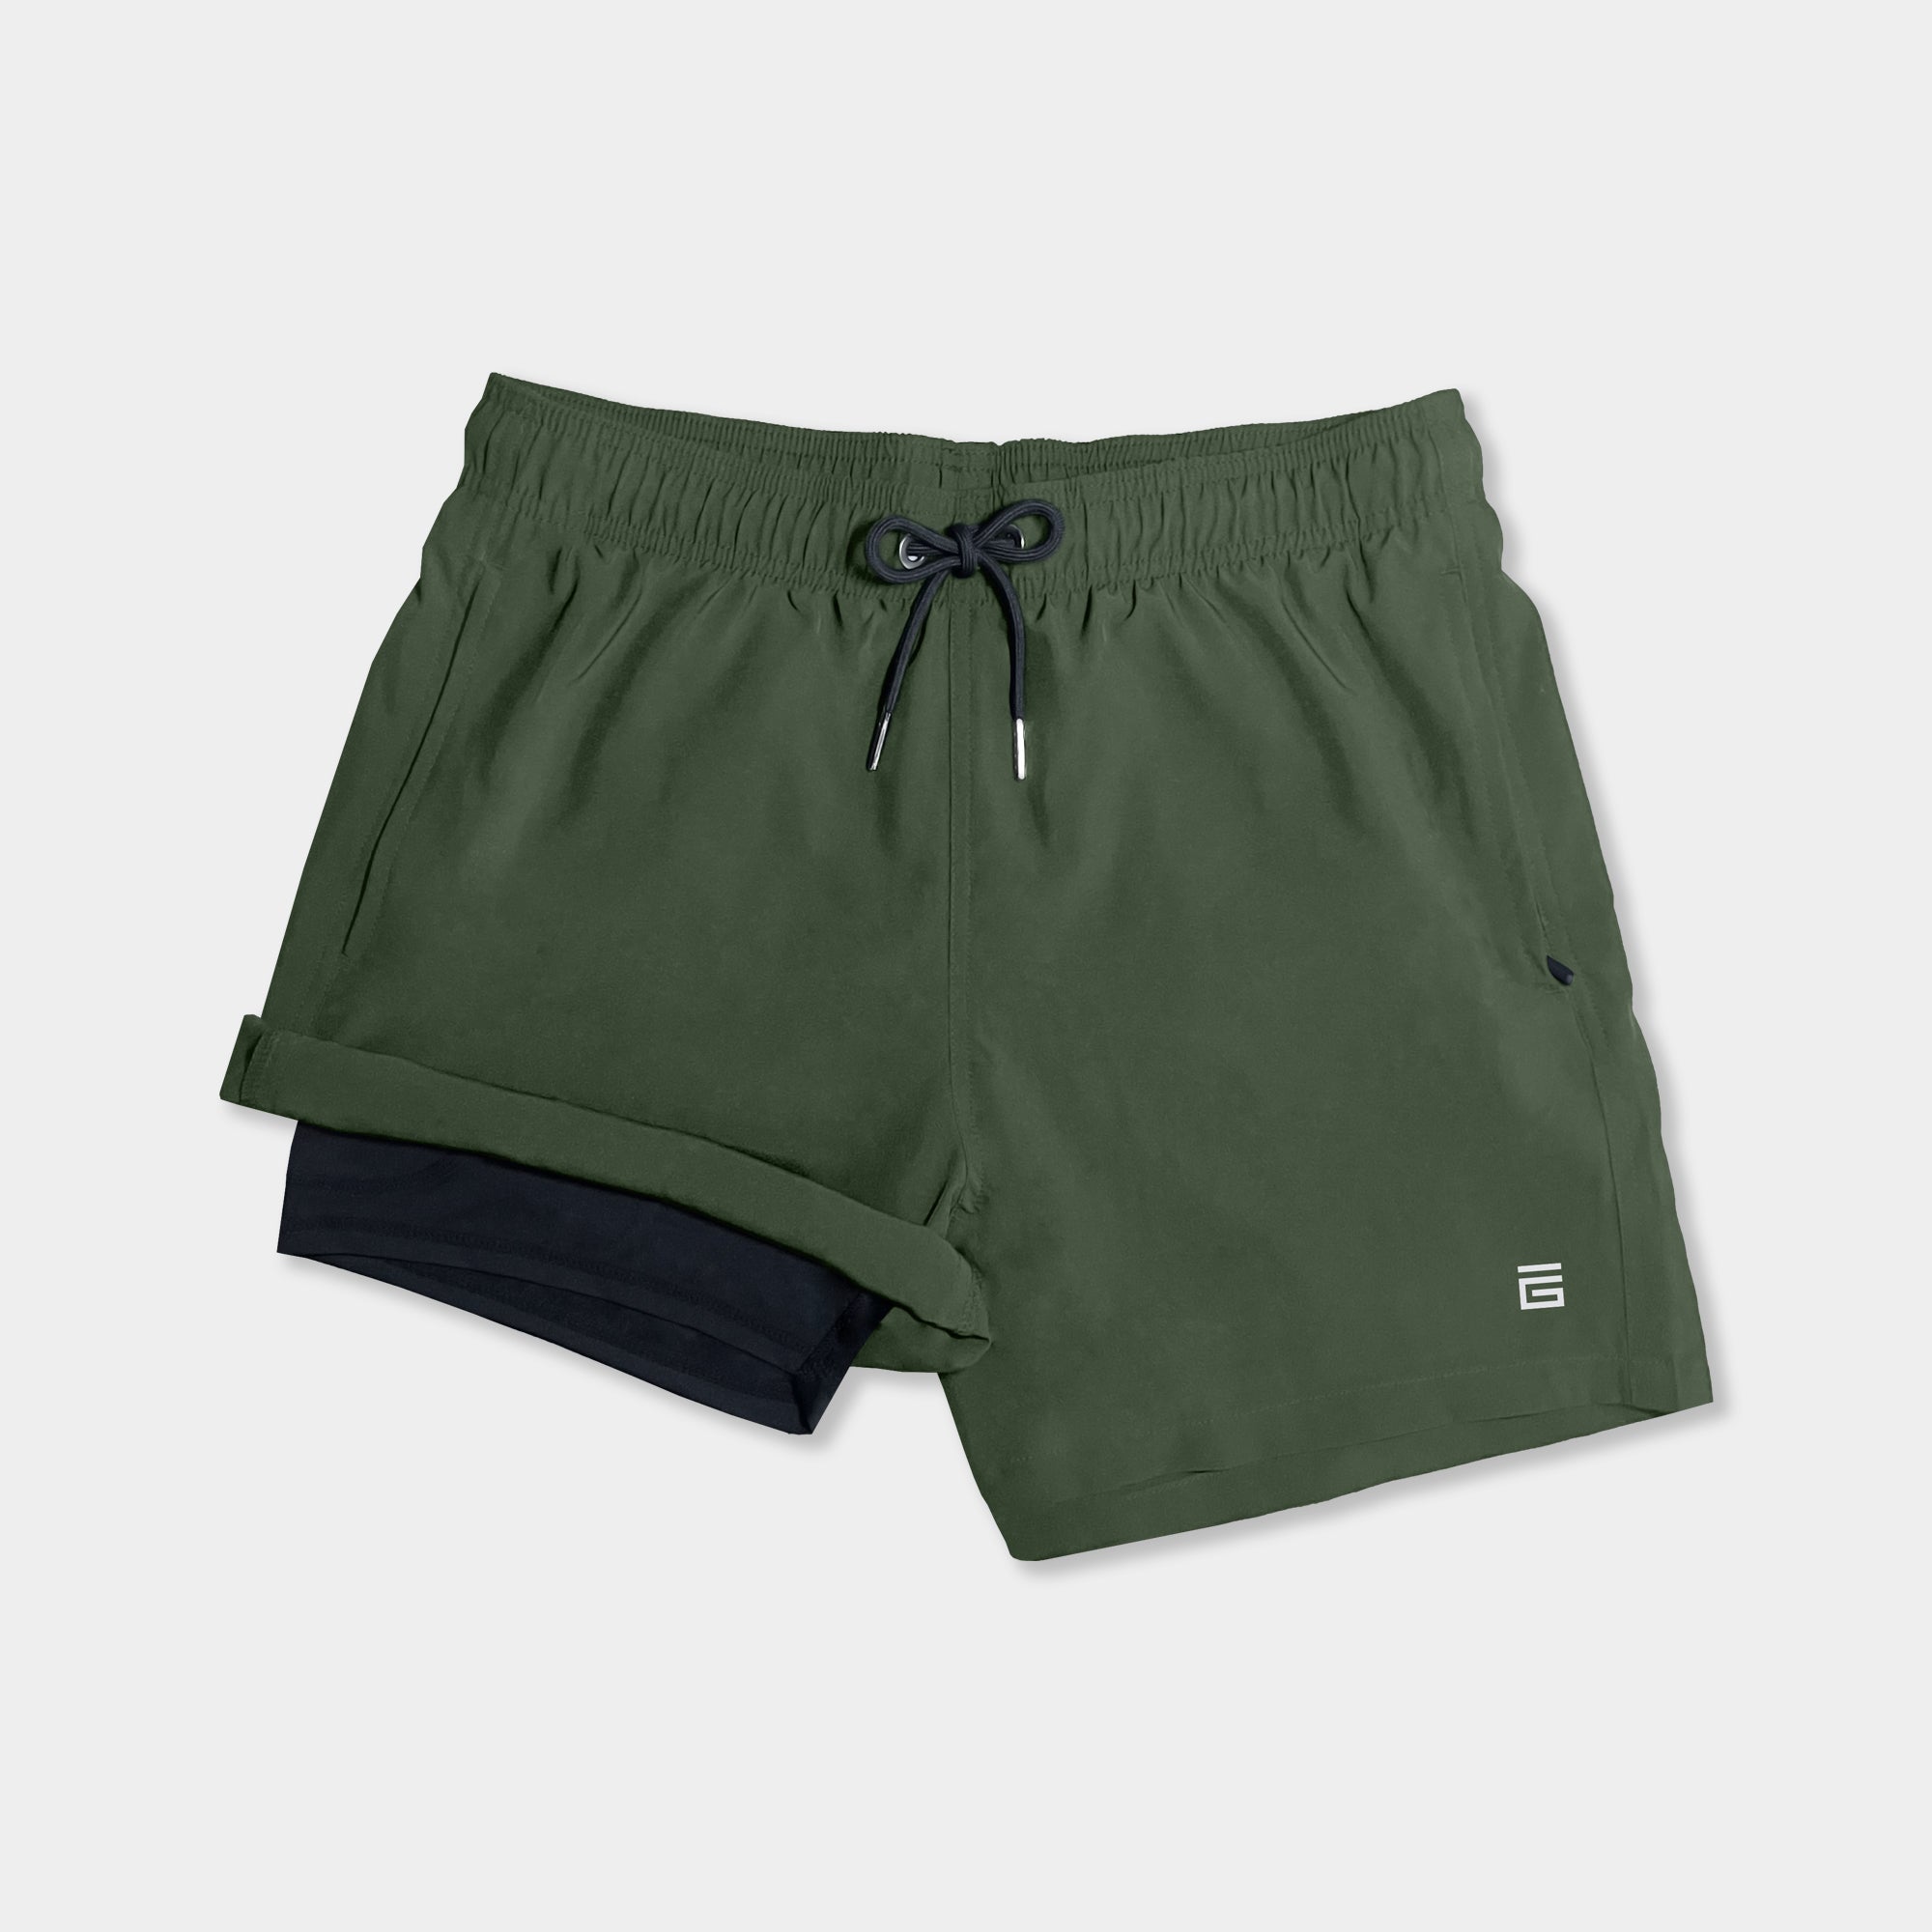 Micro shorts for men: how short is too short?